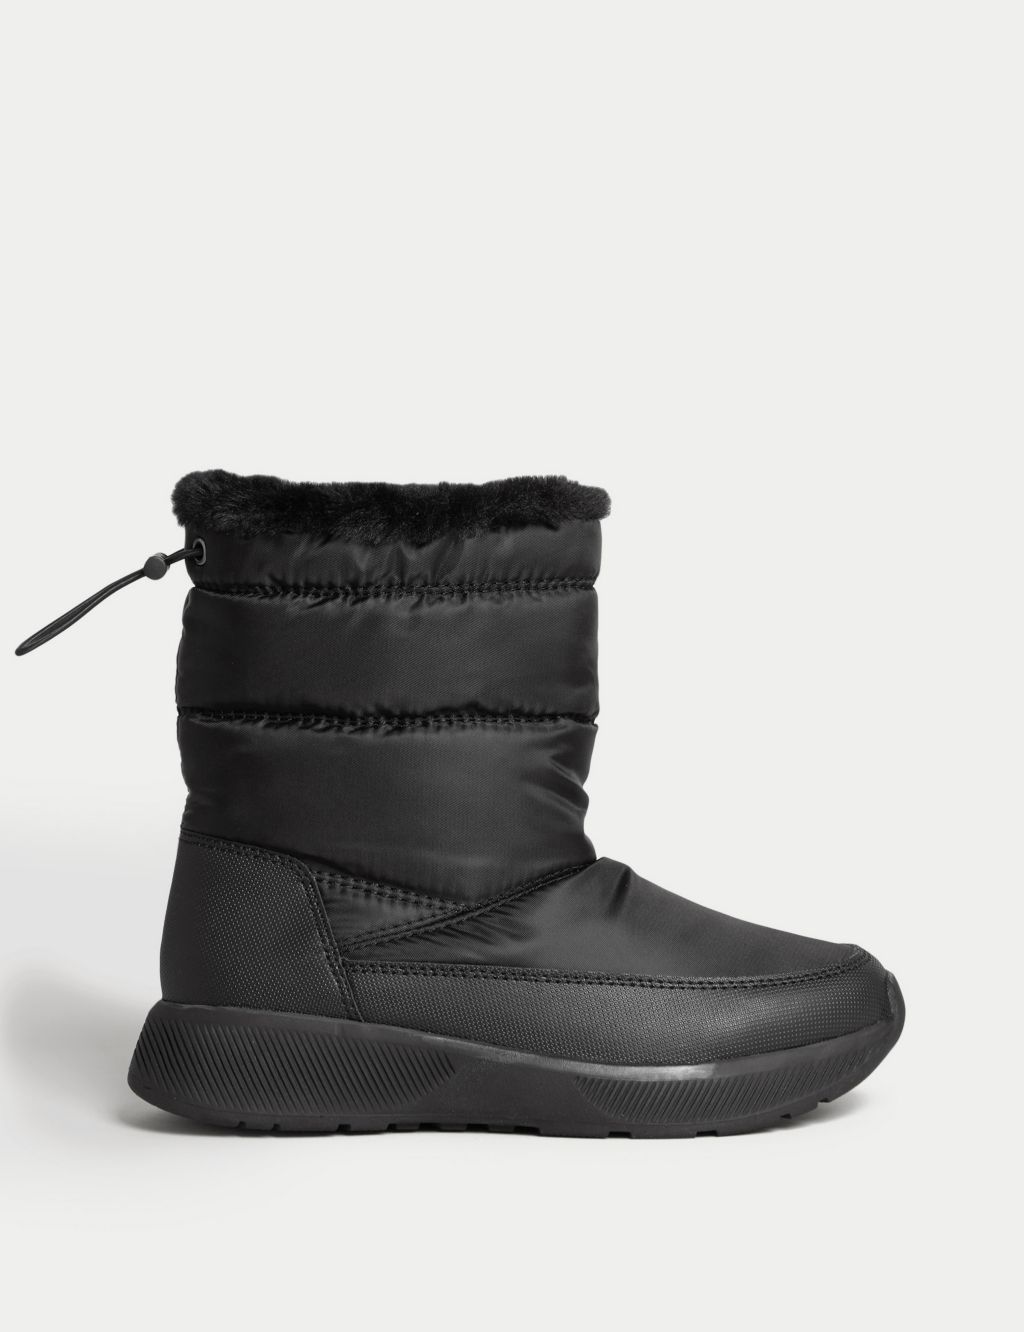 Quilted Flatform Walking Boots image 1